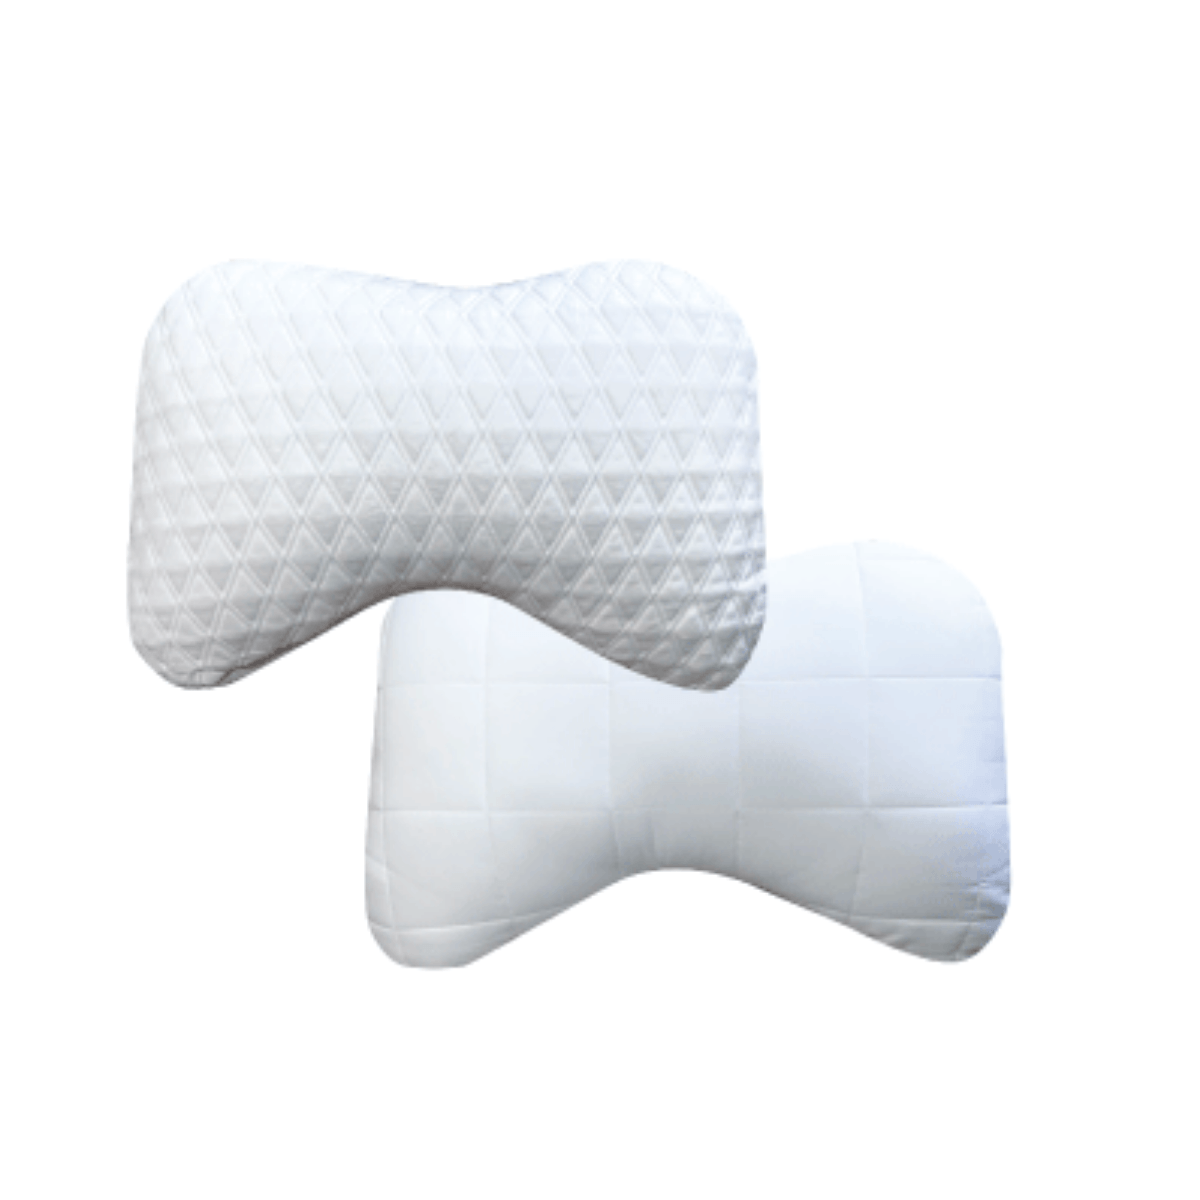 Sealy All Night Cooling Pillow, Standard/Queen - White